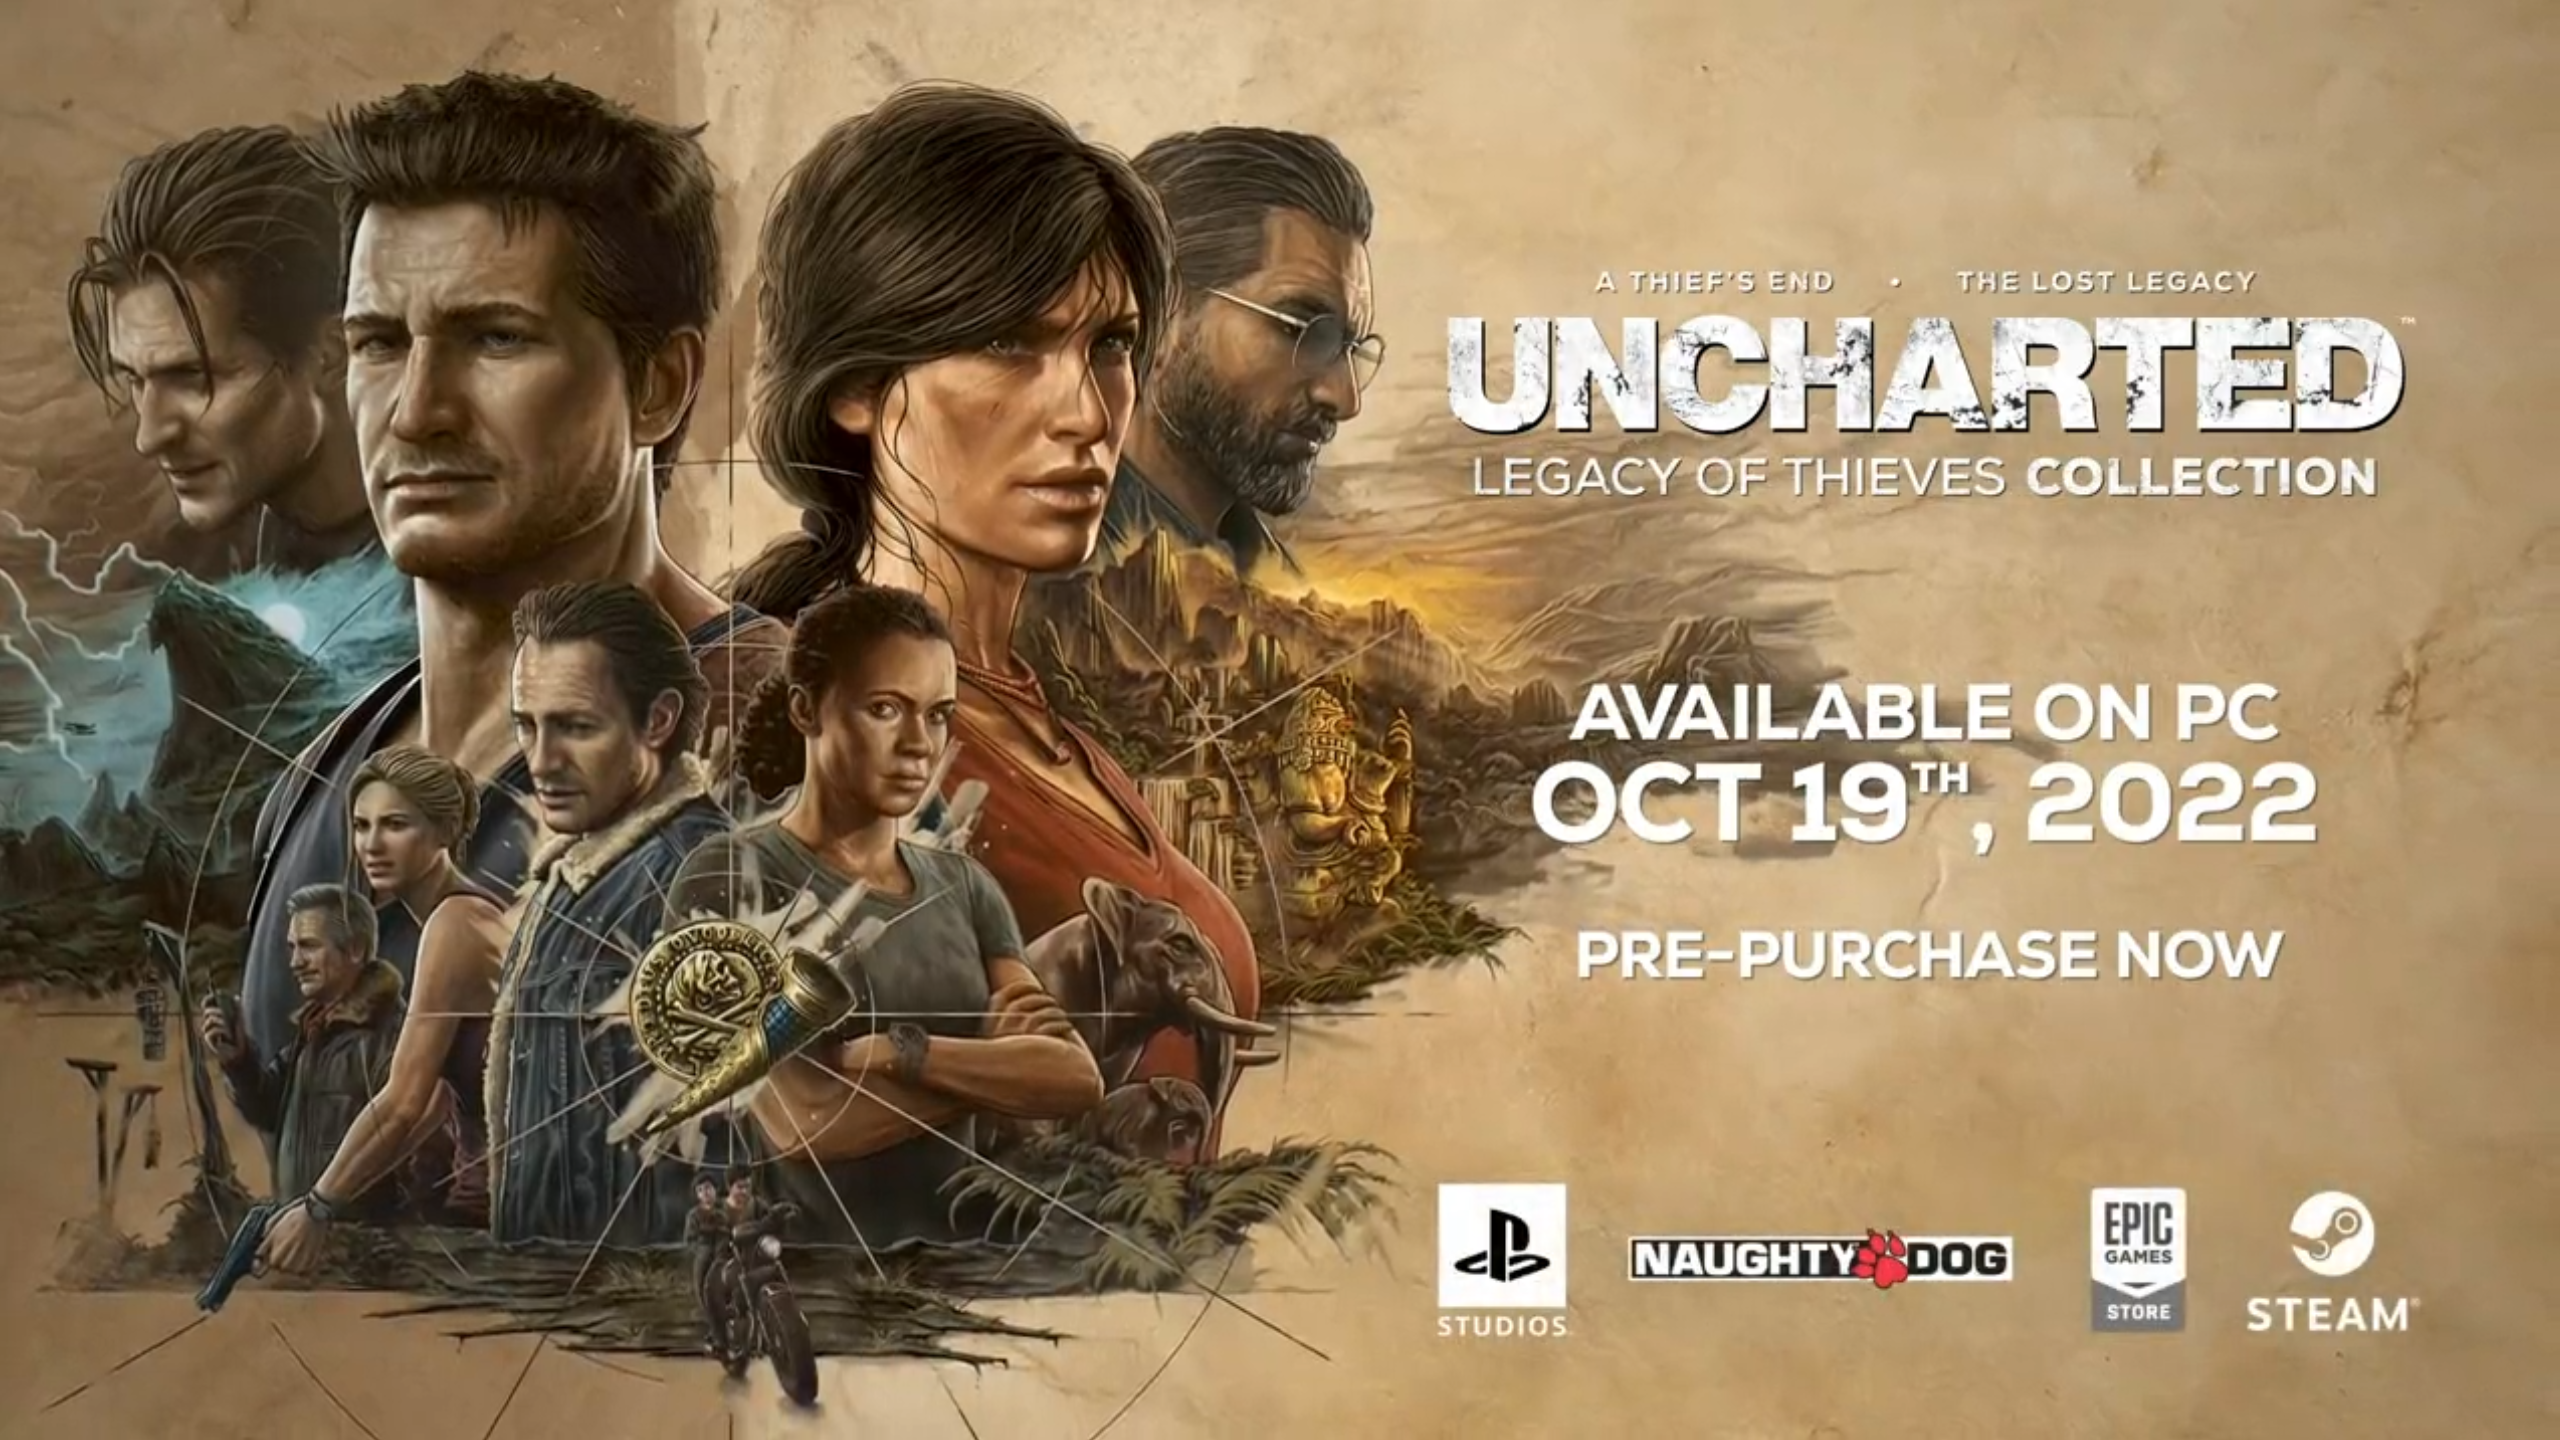 Uncharted: Legacy of Thieves Collection Confirms PC Release Date